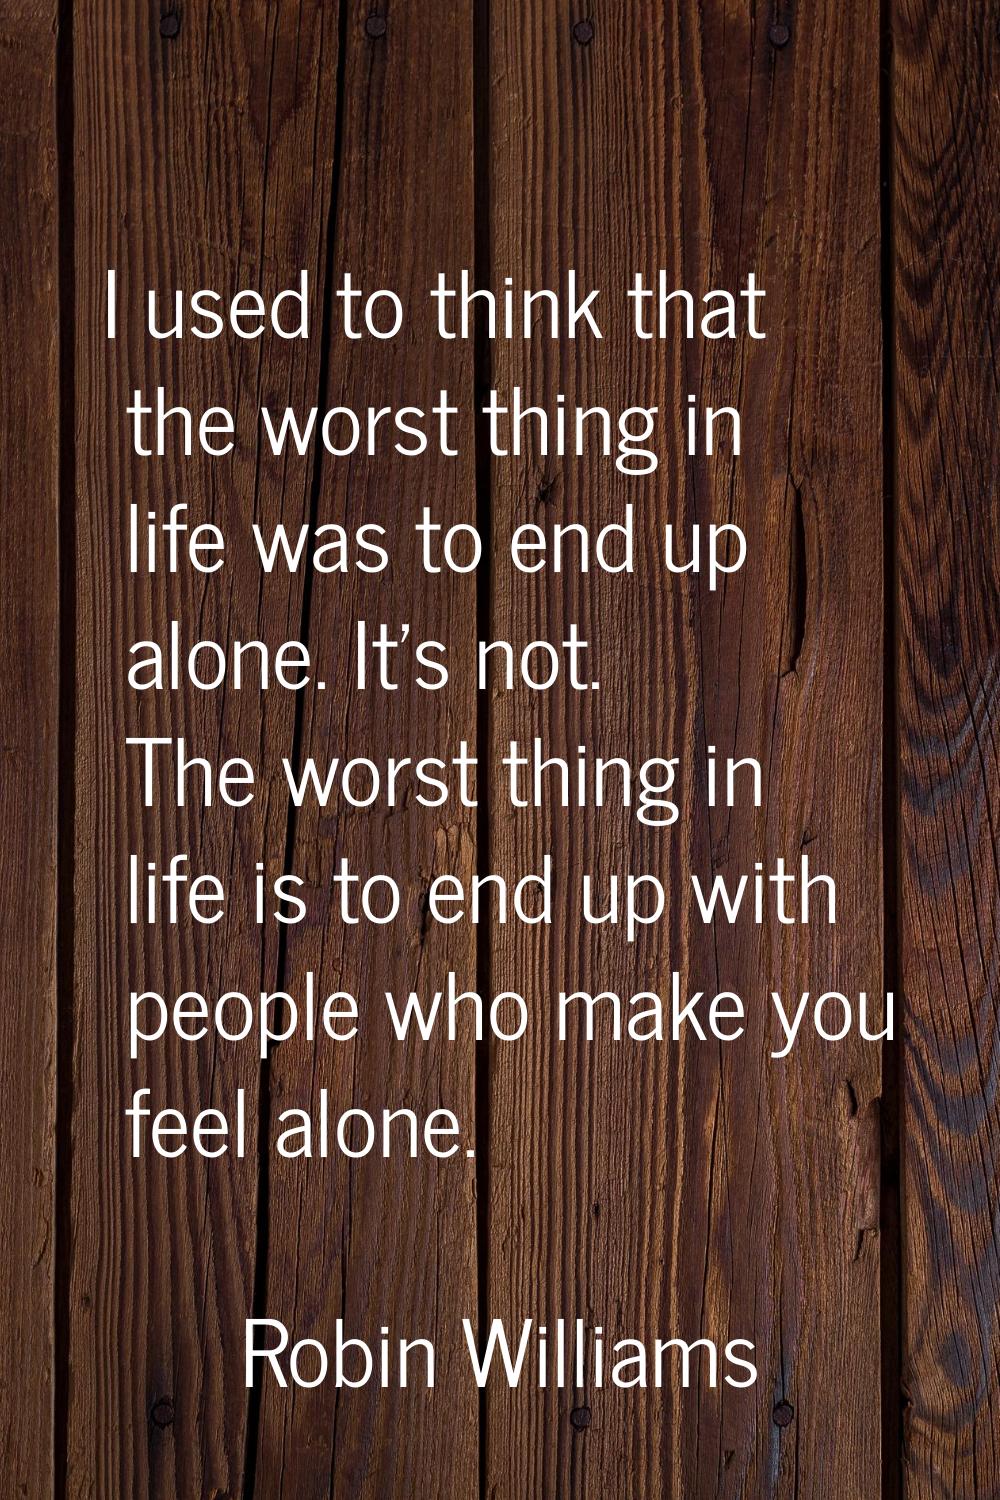 I used to think that the worst thing in life was to end up alone. It's not. The worst thing in life